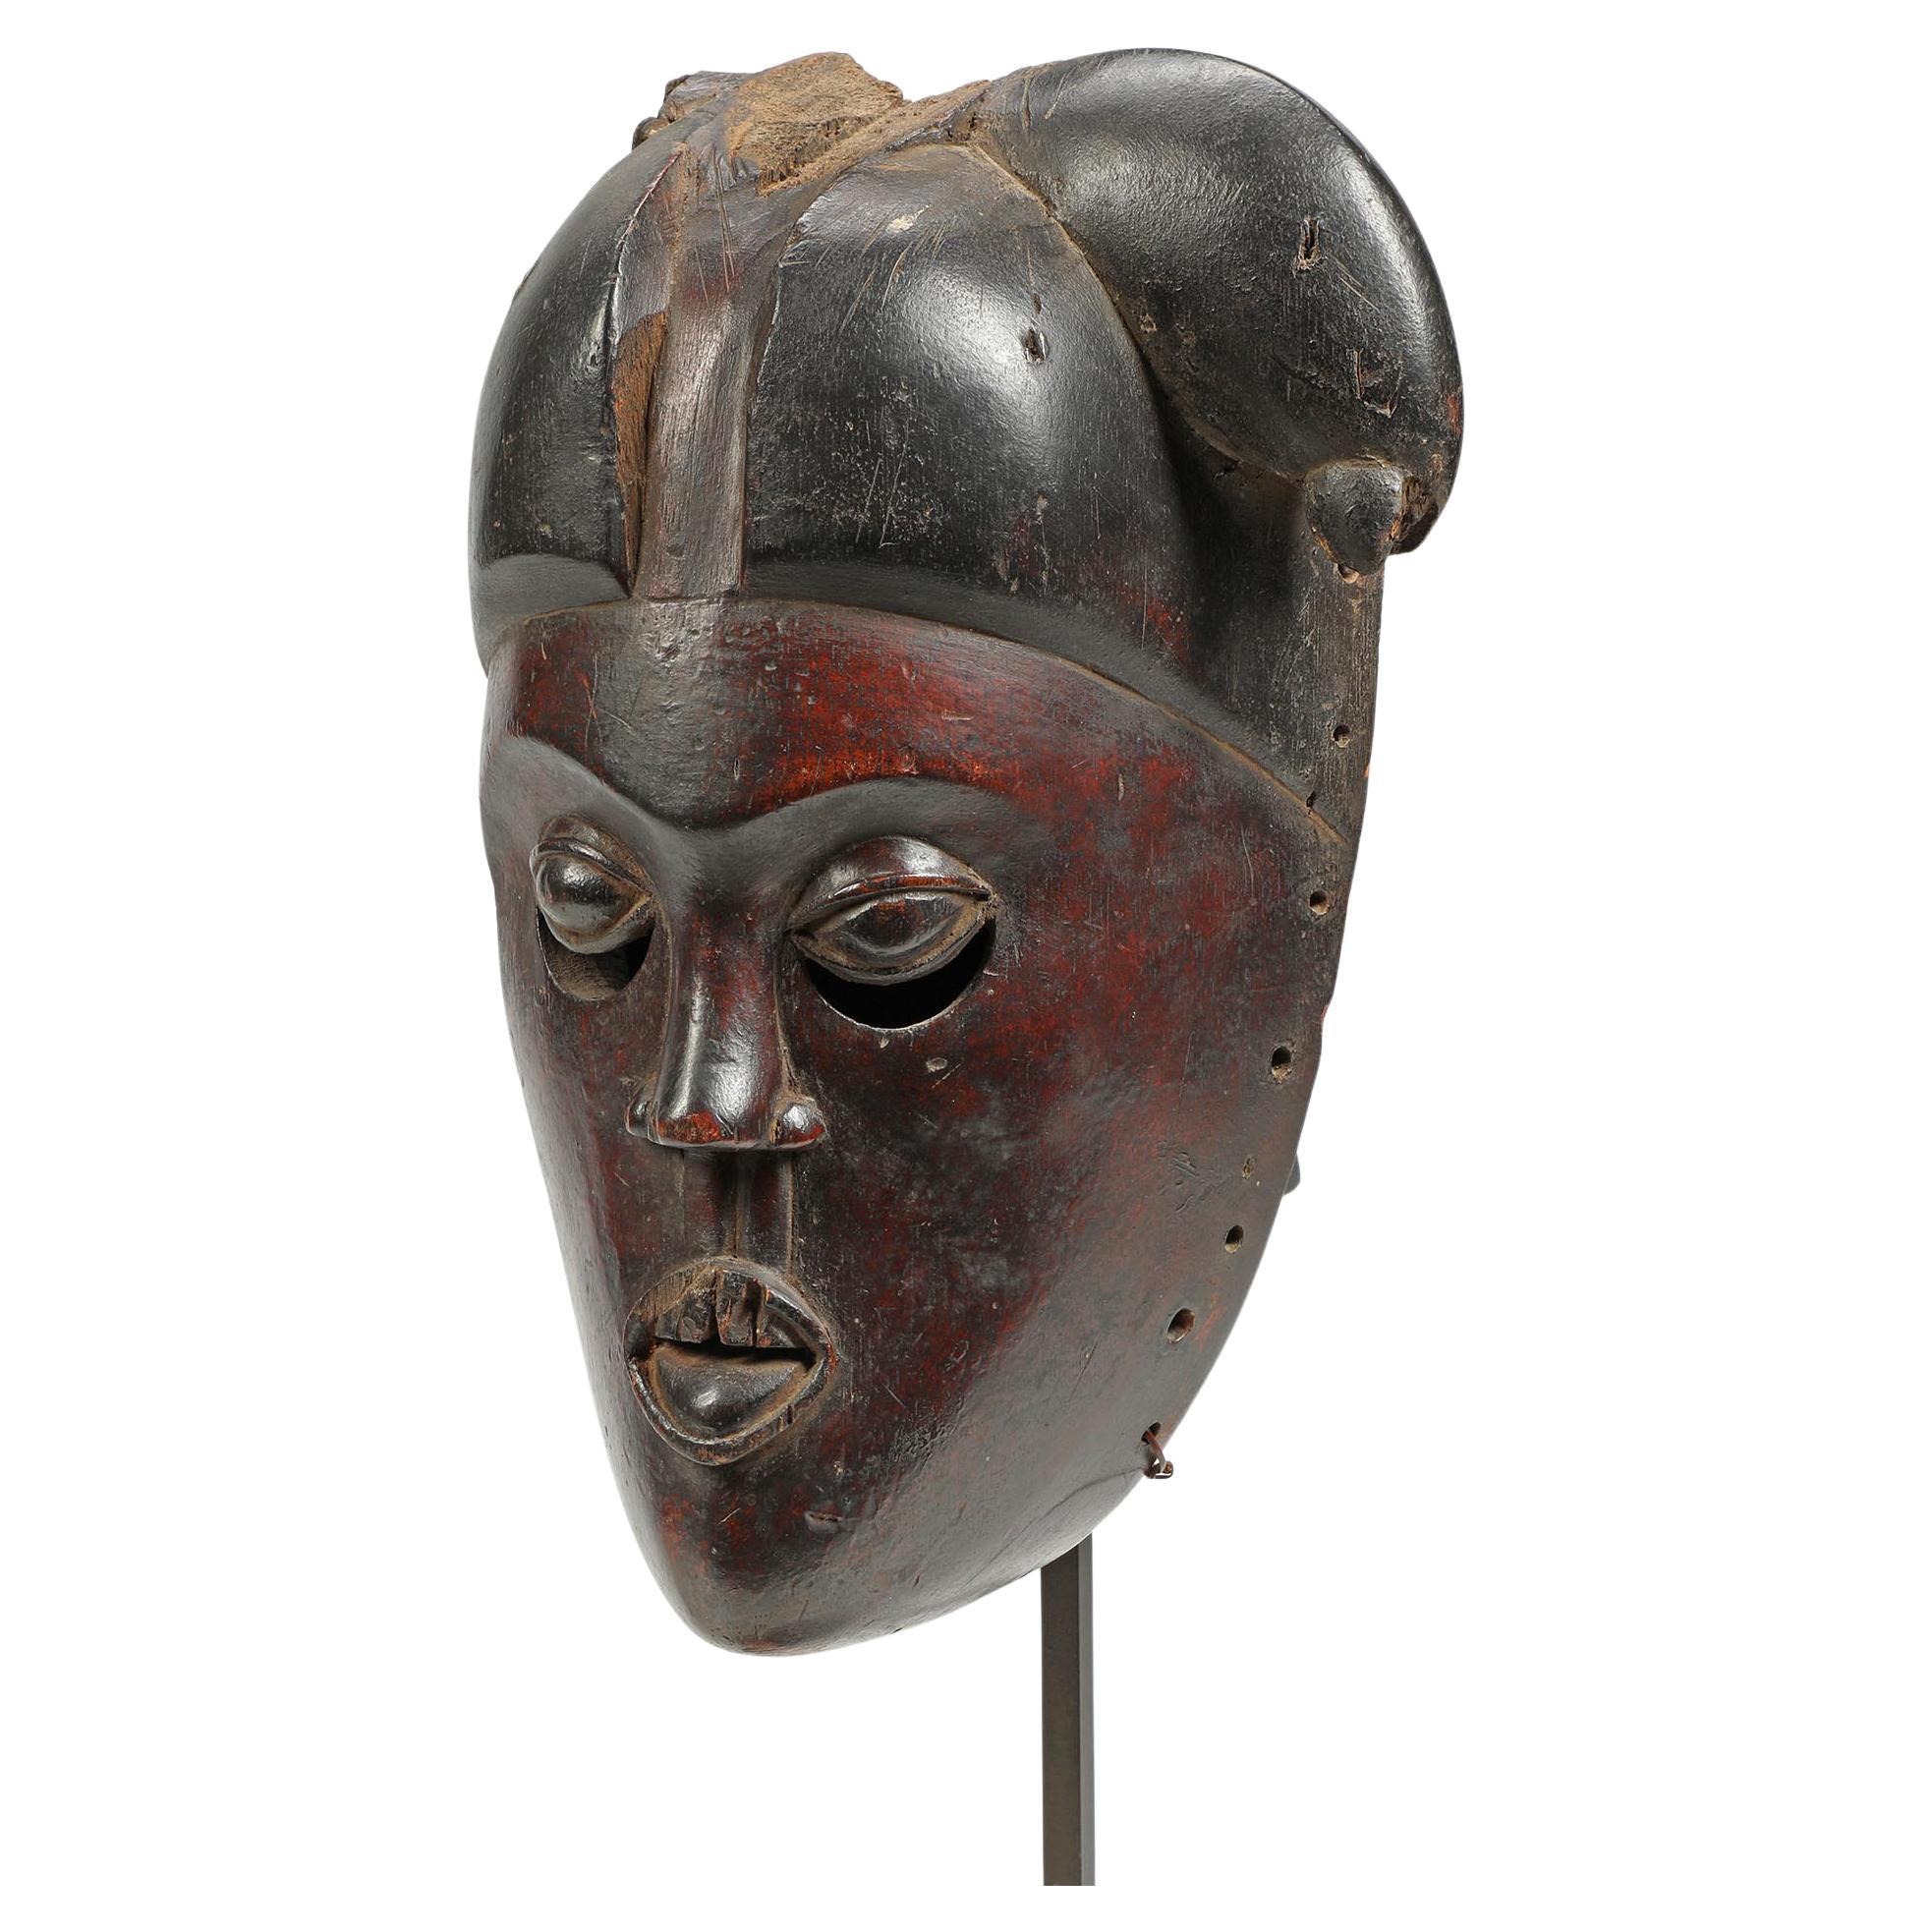 Early Ibibio mask fragment from Nigeria, deep black-red pigment, expressive eyes. A compelling face on a custom metal stand. Old insect damage/erosion to proper right hair and side of face. Mask 10.75 inches high, on stand 16.5 inches.
Important